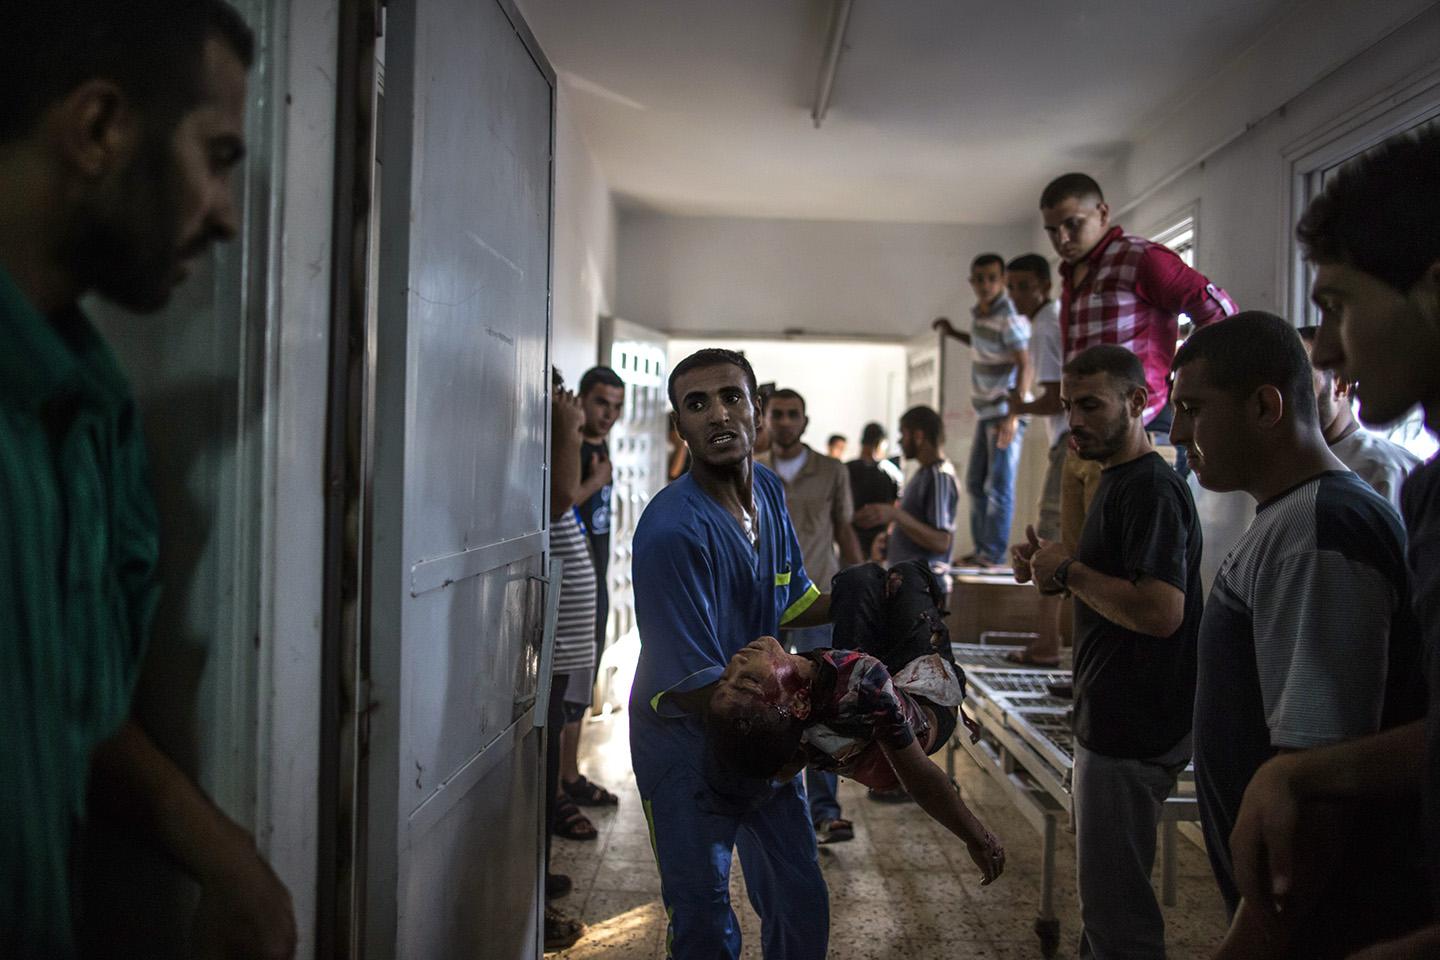 death of at least seven Palestinian children on air strikes launched by the Israeli military.